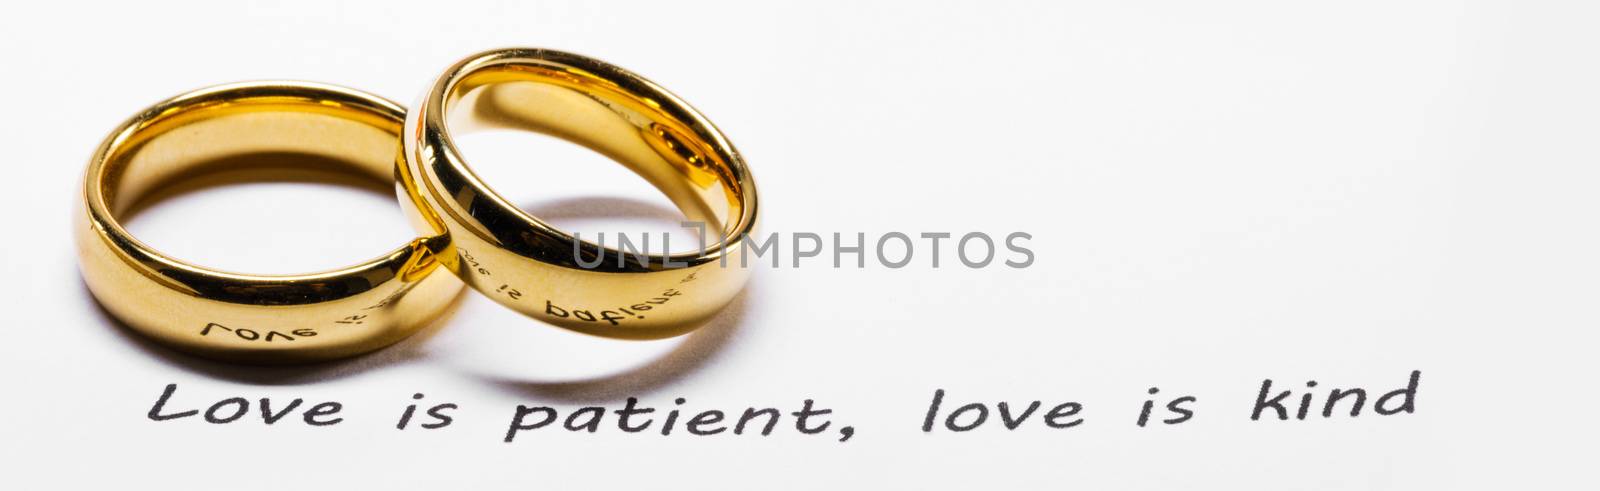 Golden wedding rings on bible phrase by Yellowj